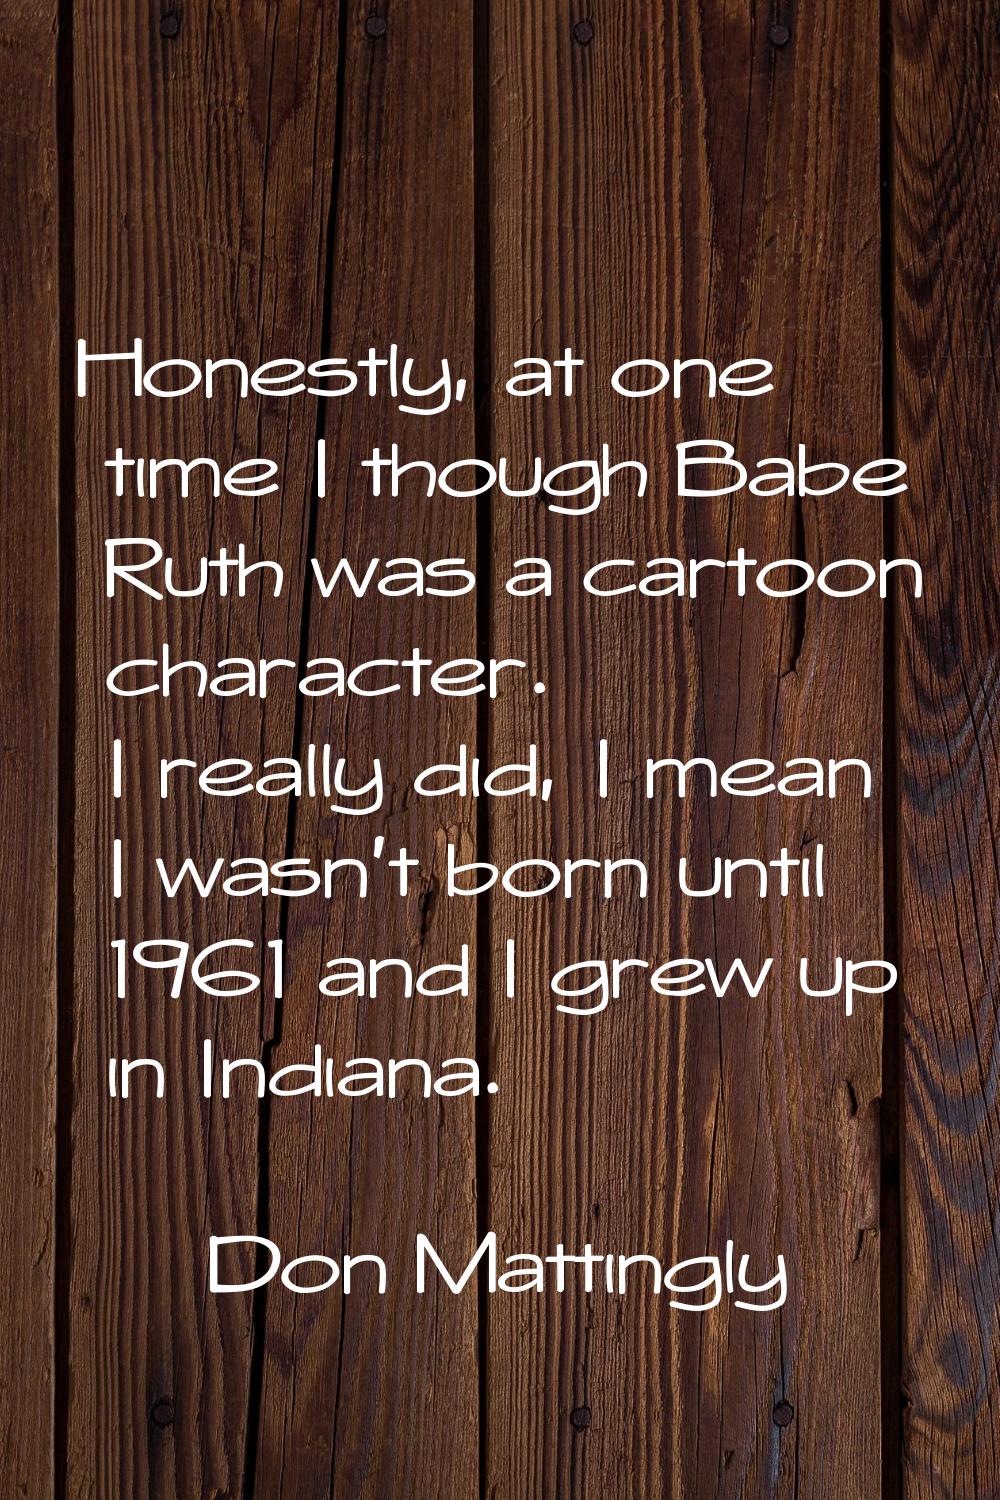 Honestly, at one time I though Babe Ruth was a cartoon character. I really did, I mean I wasn't bor